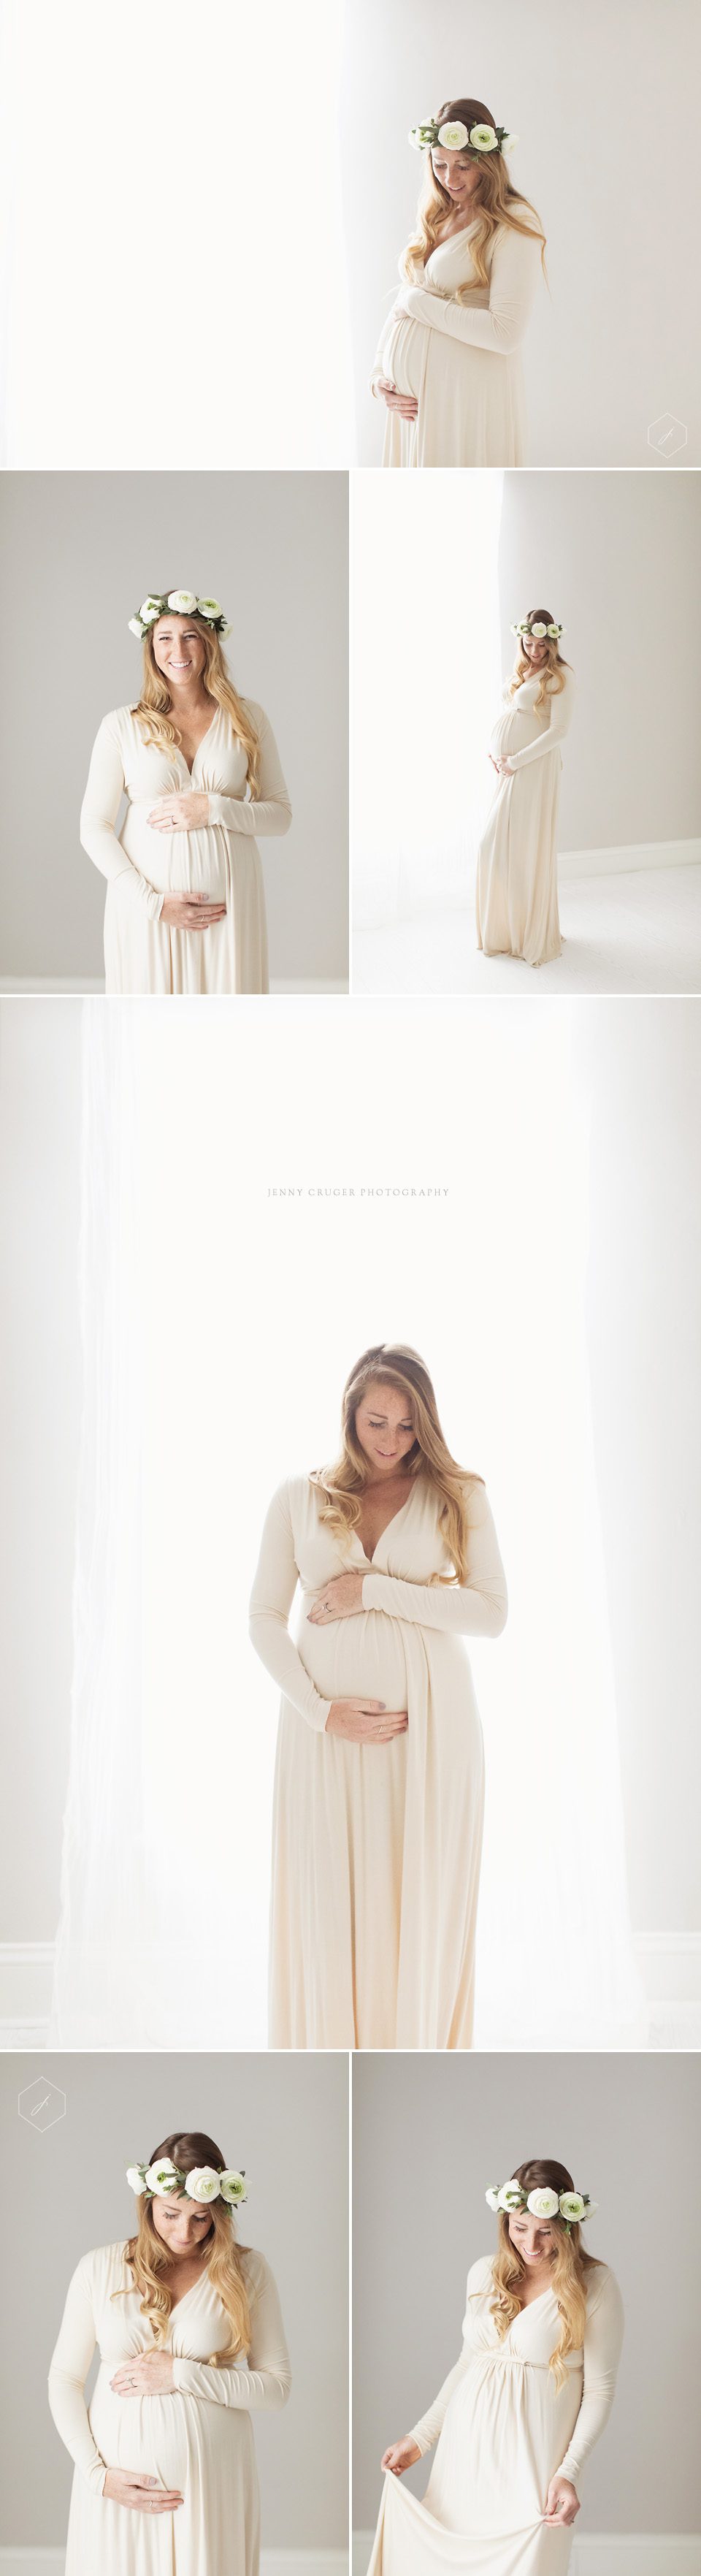 nashville maternity photographers flower crown maternity bright and airy pictures